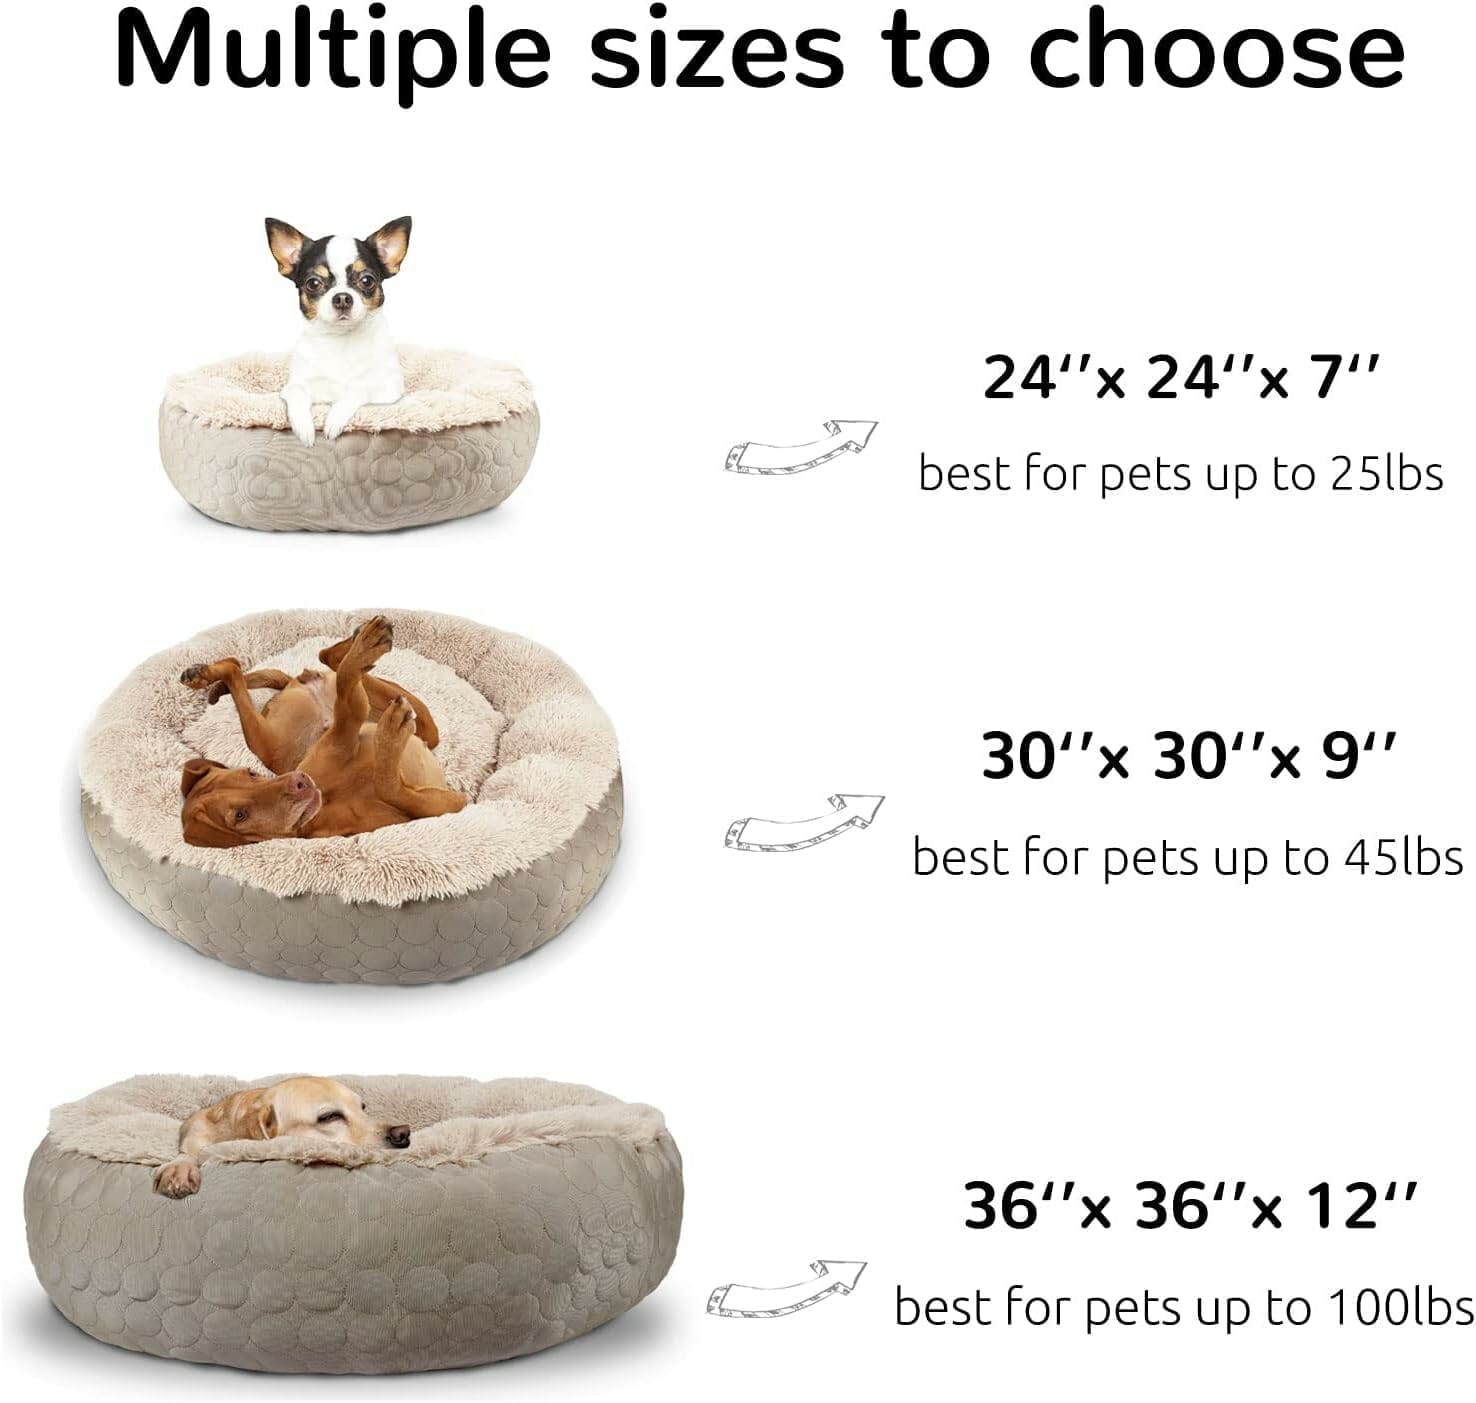 HACHIKITTY Dog Donut Bed Calming Bed Review – The Ultimate Comfort for Your Pup?